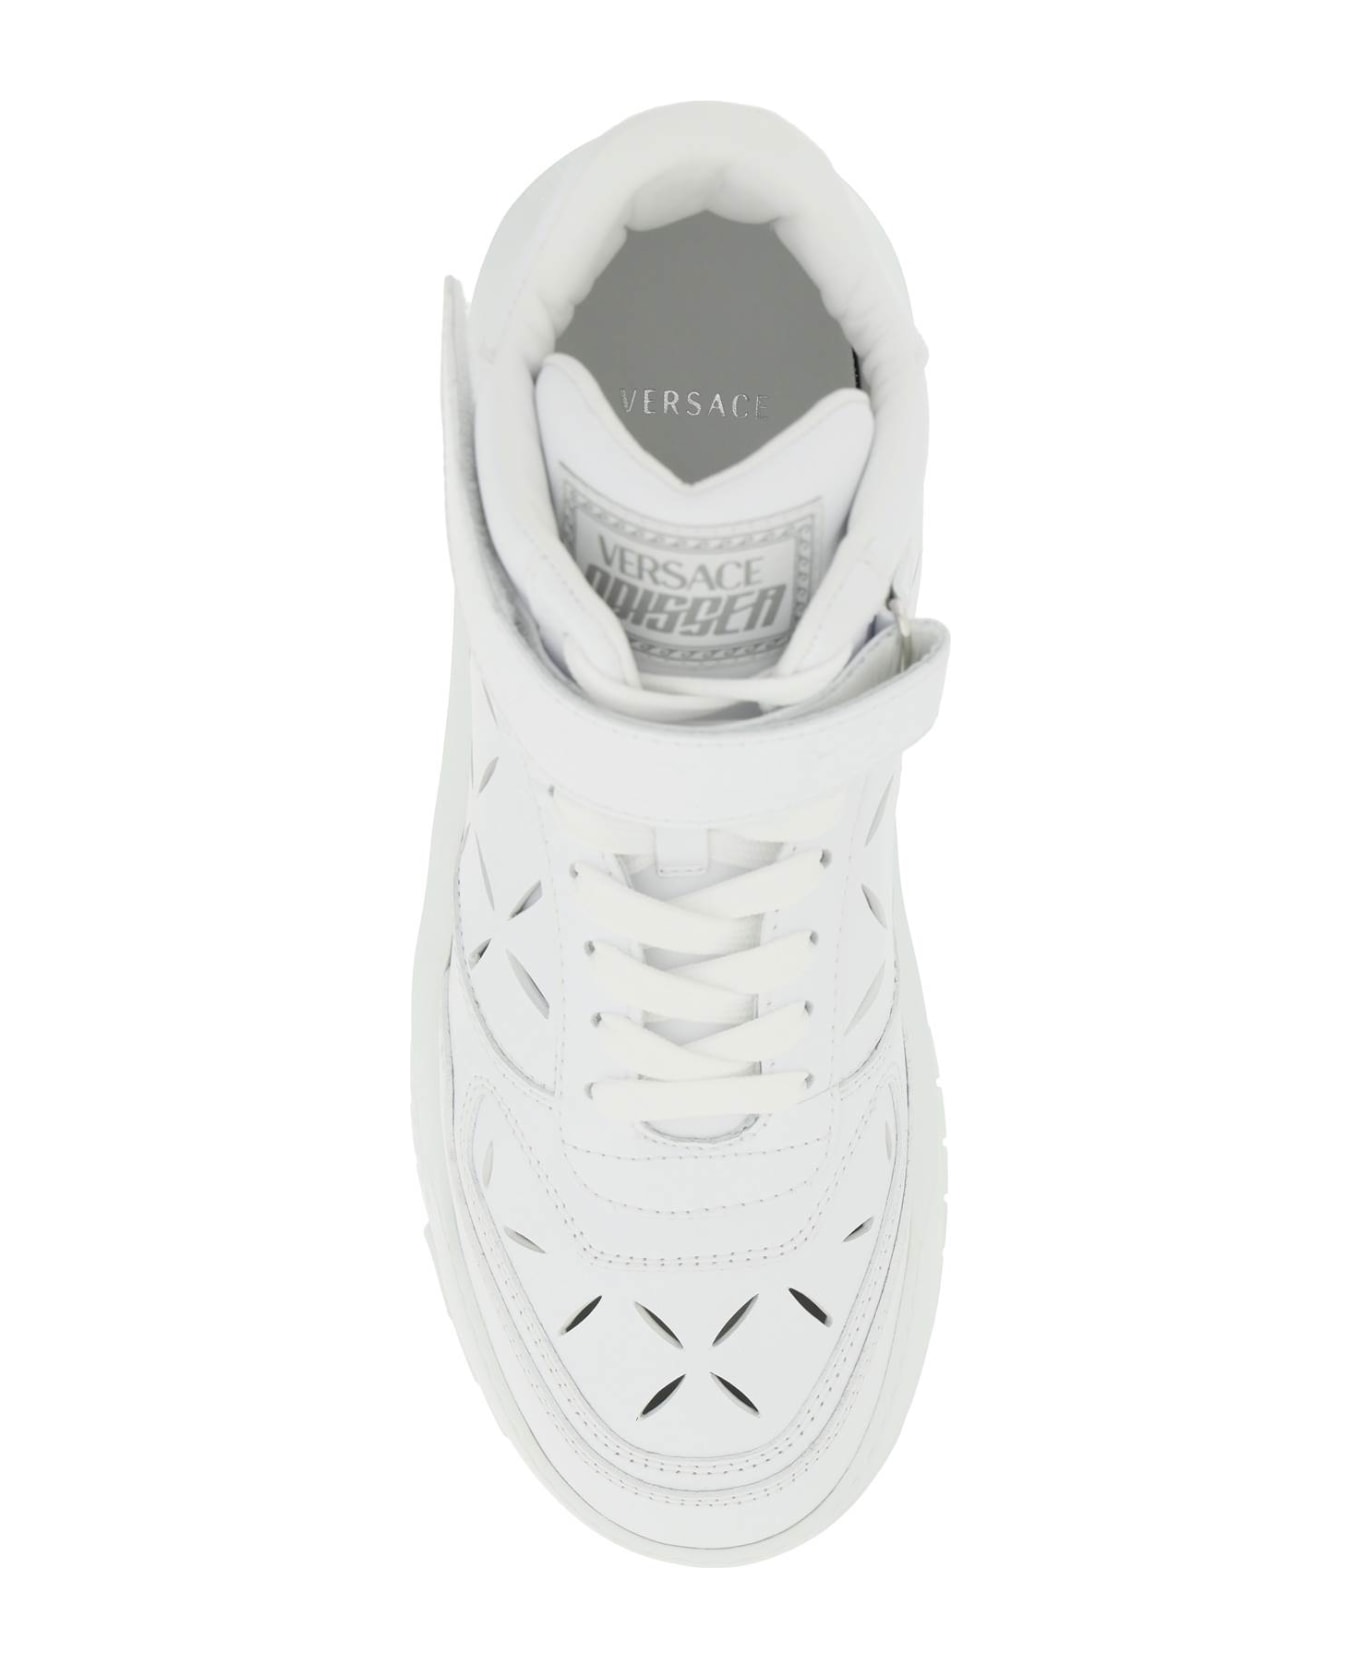 Versace Odissea Leather High-top Sneakers - White スニーカー